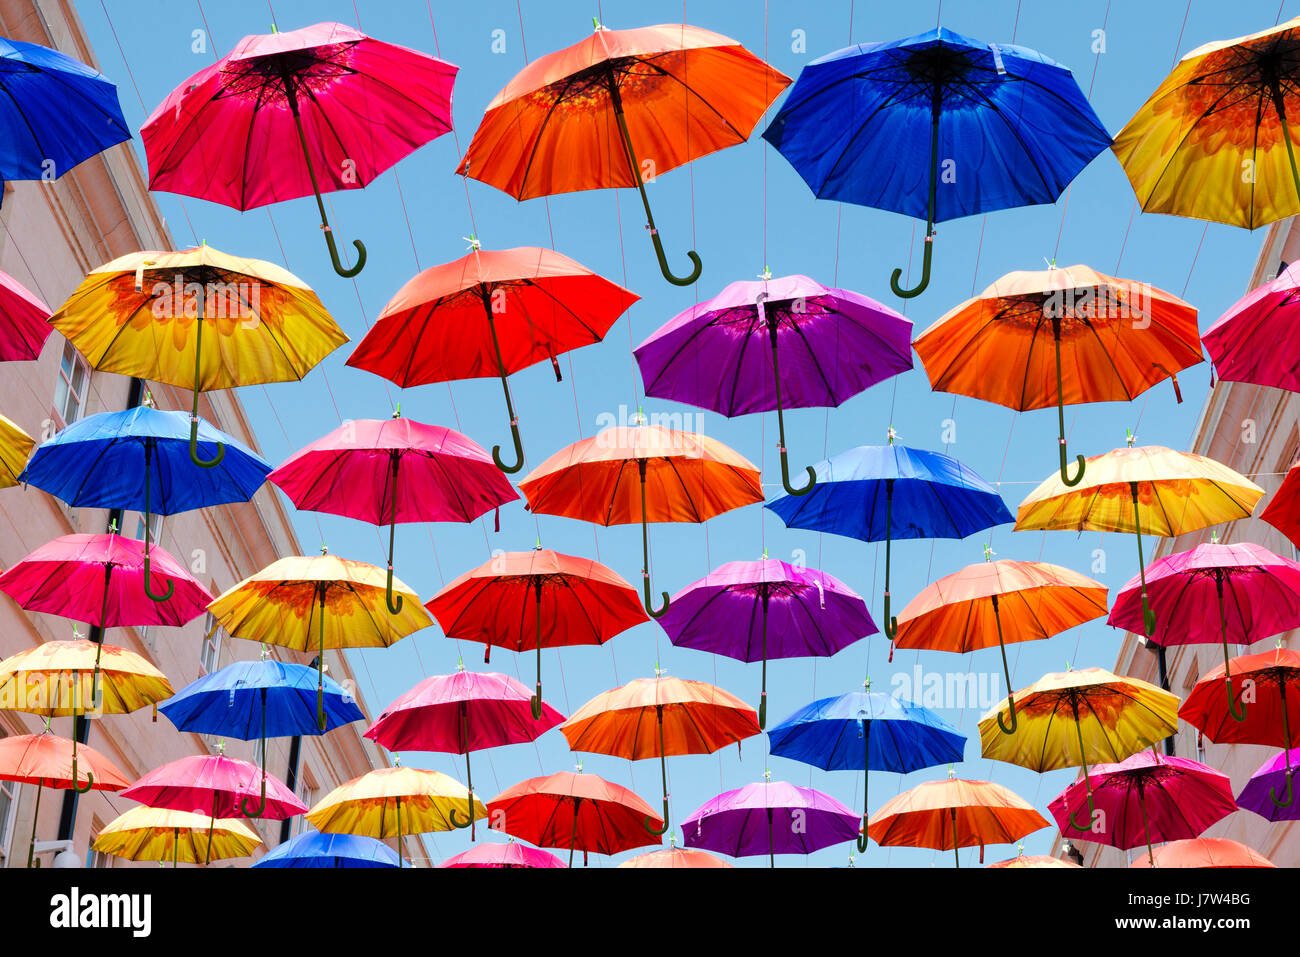 Bath, Somerset, UK. Colourful umbrellas suspended above the street as part of an art festival. Stock Photo